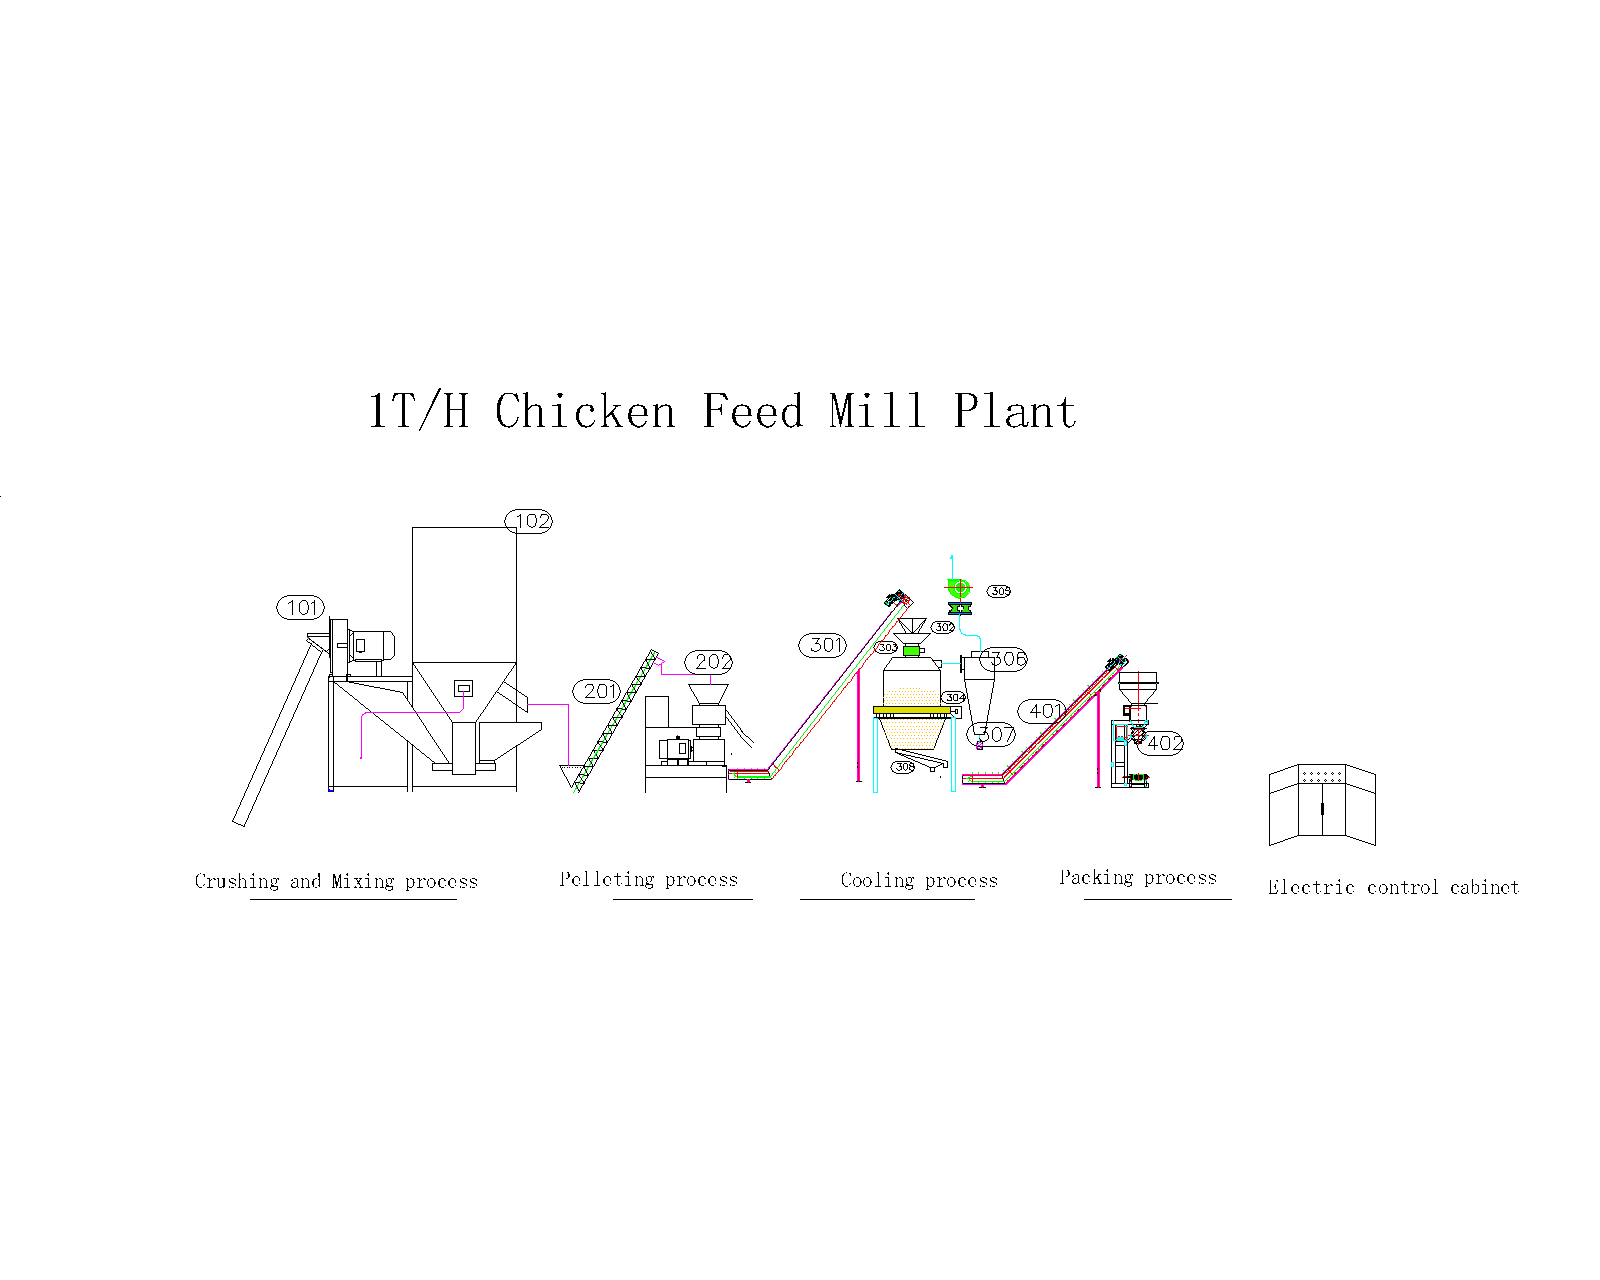 1T/H Chicken Feed Mill Plant